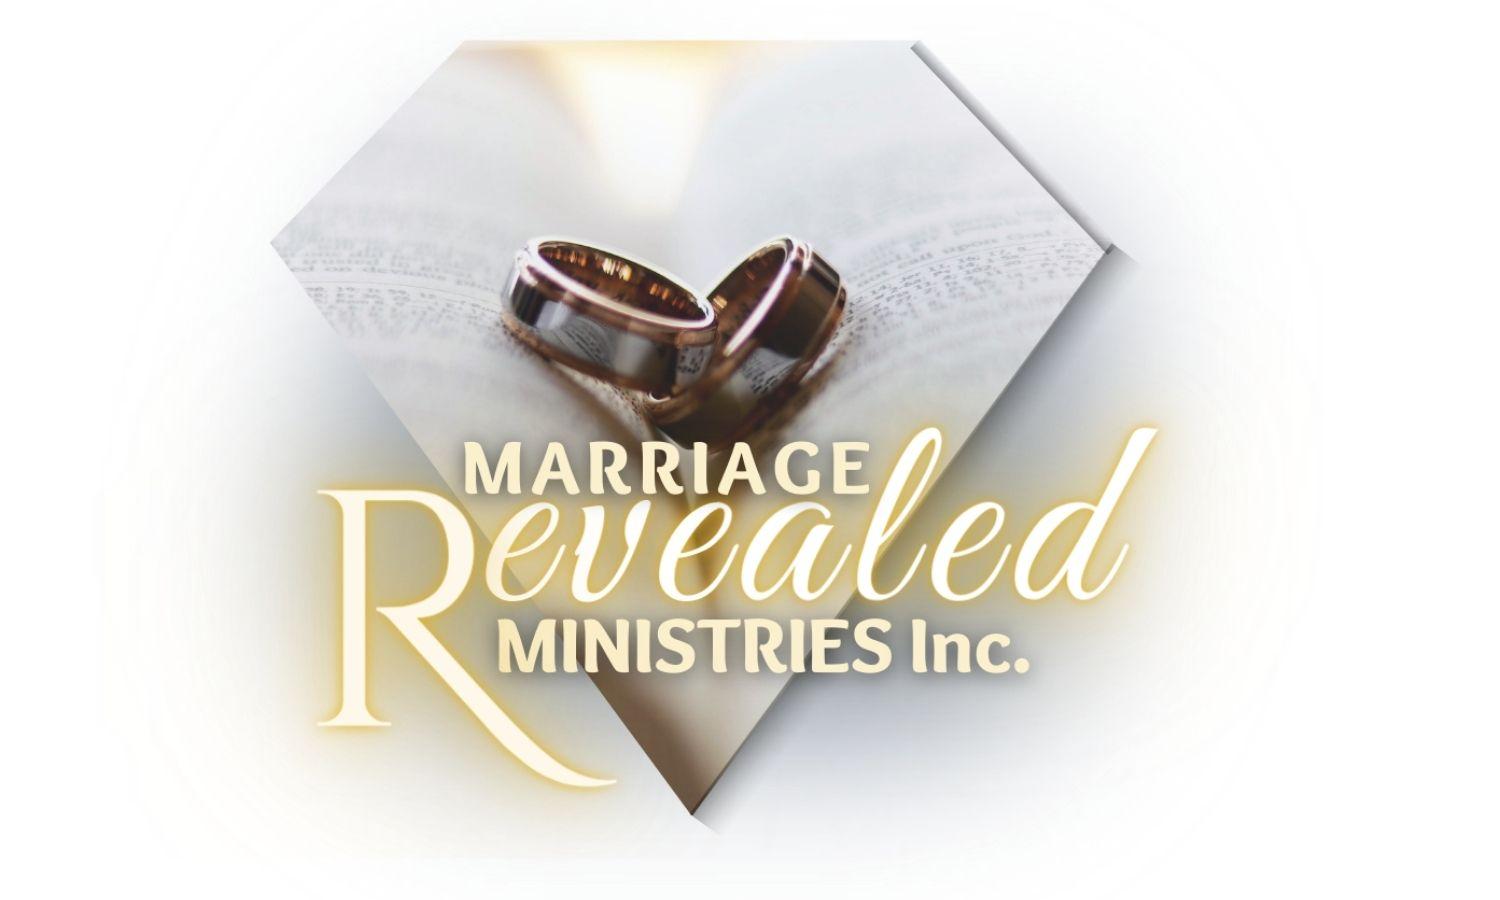 Marriage Revealed Ministries Inc.